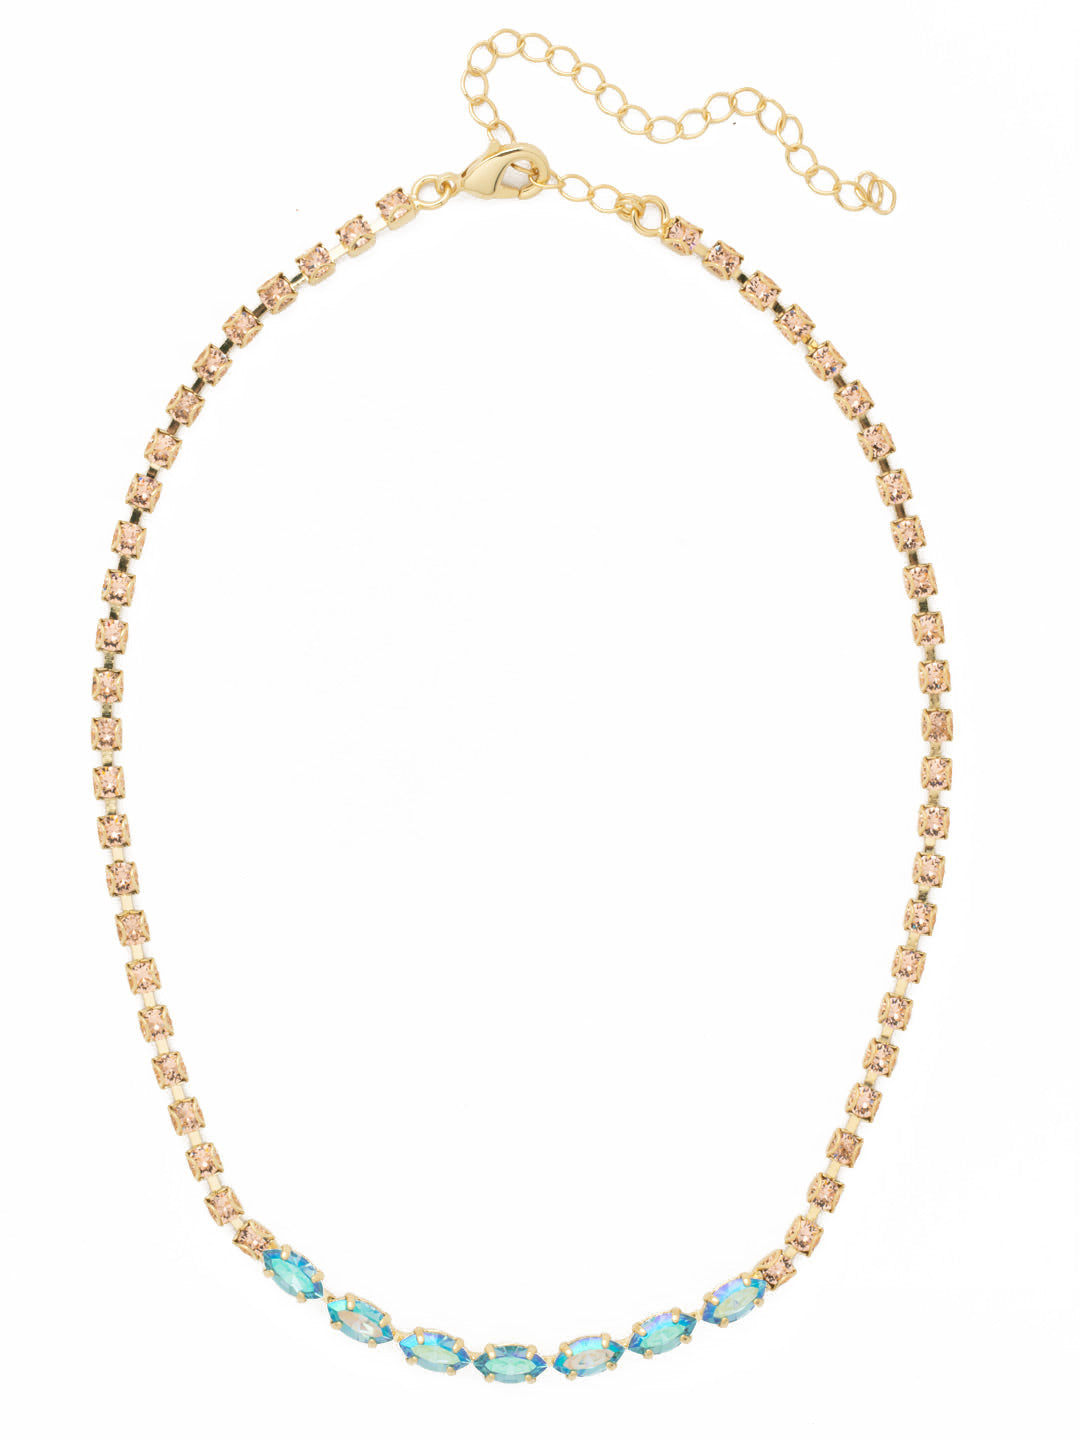 Clarissa Rhinestone Chain Tennis Necklace - NFL6BGPRT - <p>The Clarissa Rhinestone Chain Tennis Necklace features a line of navette cut crystals on an adjustable rhinestone chain, secured with a lobster claw clasp. From Sorrelli's Portofino collection in our Bright Gold-tone finish.</p>